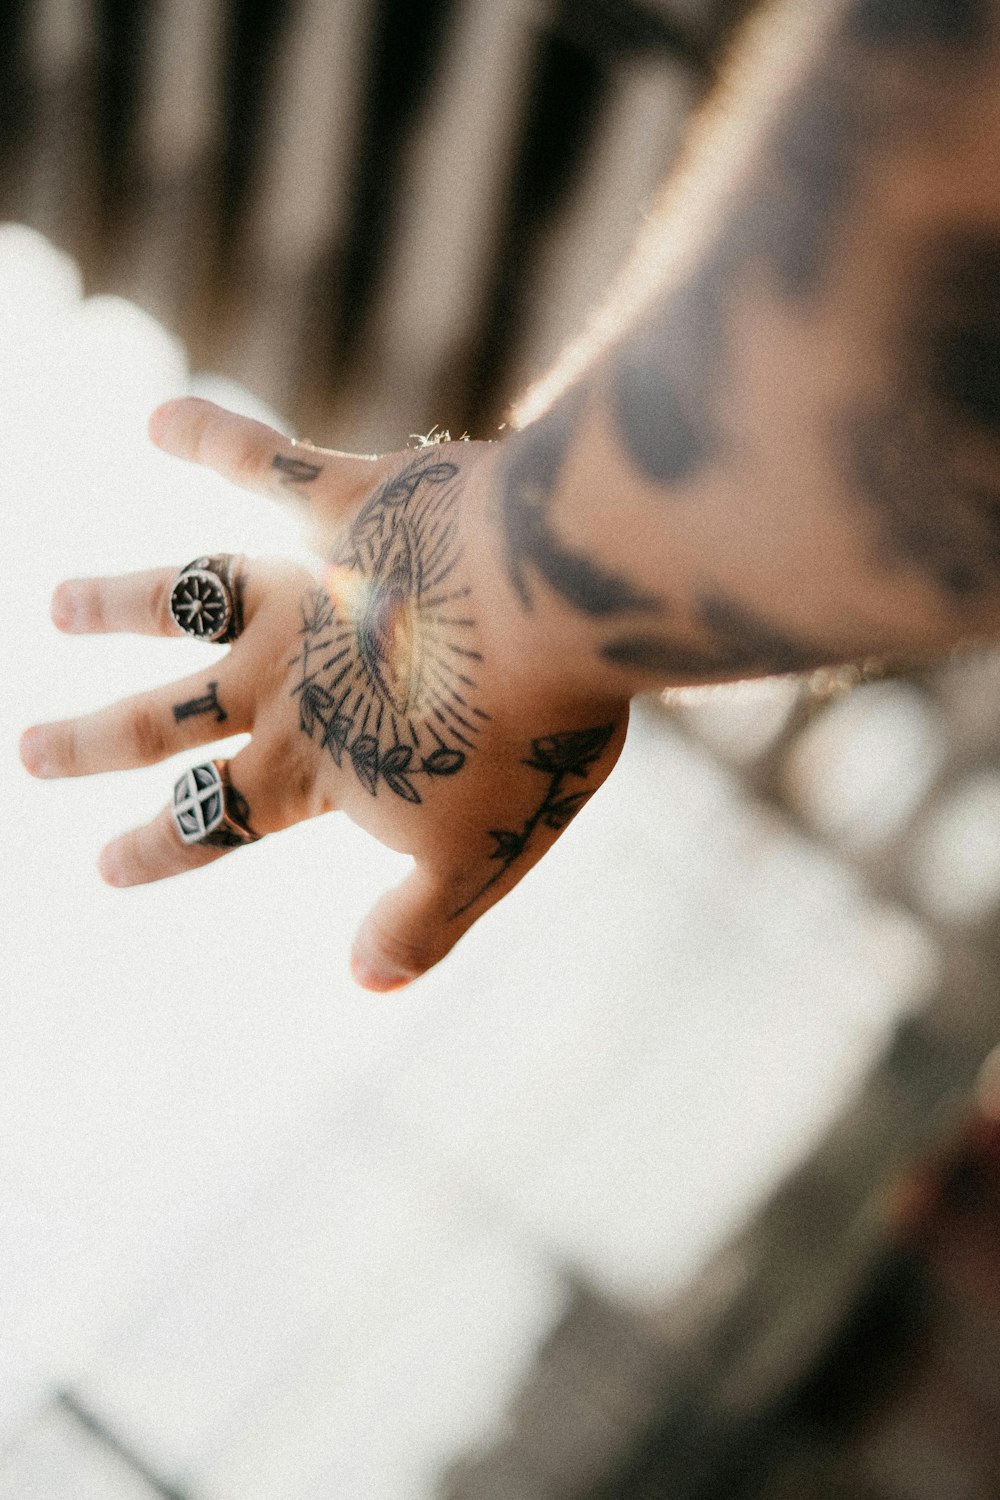 a person with a tattoo on their hand